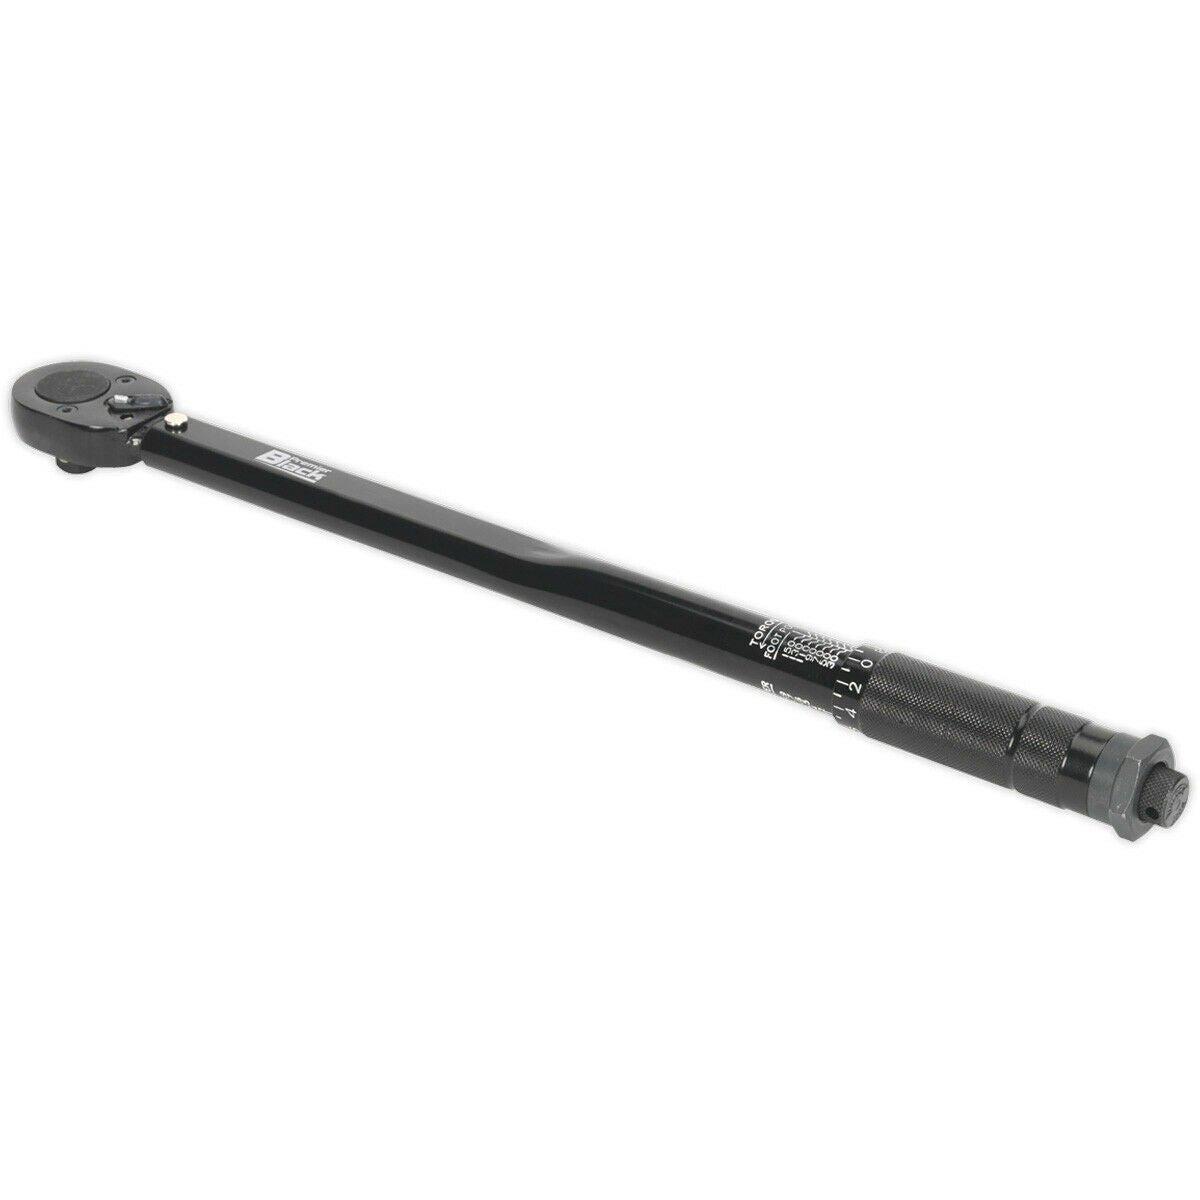 Calibrated Micrometer Torque Wrench - 1/2